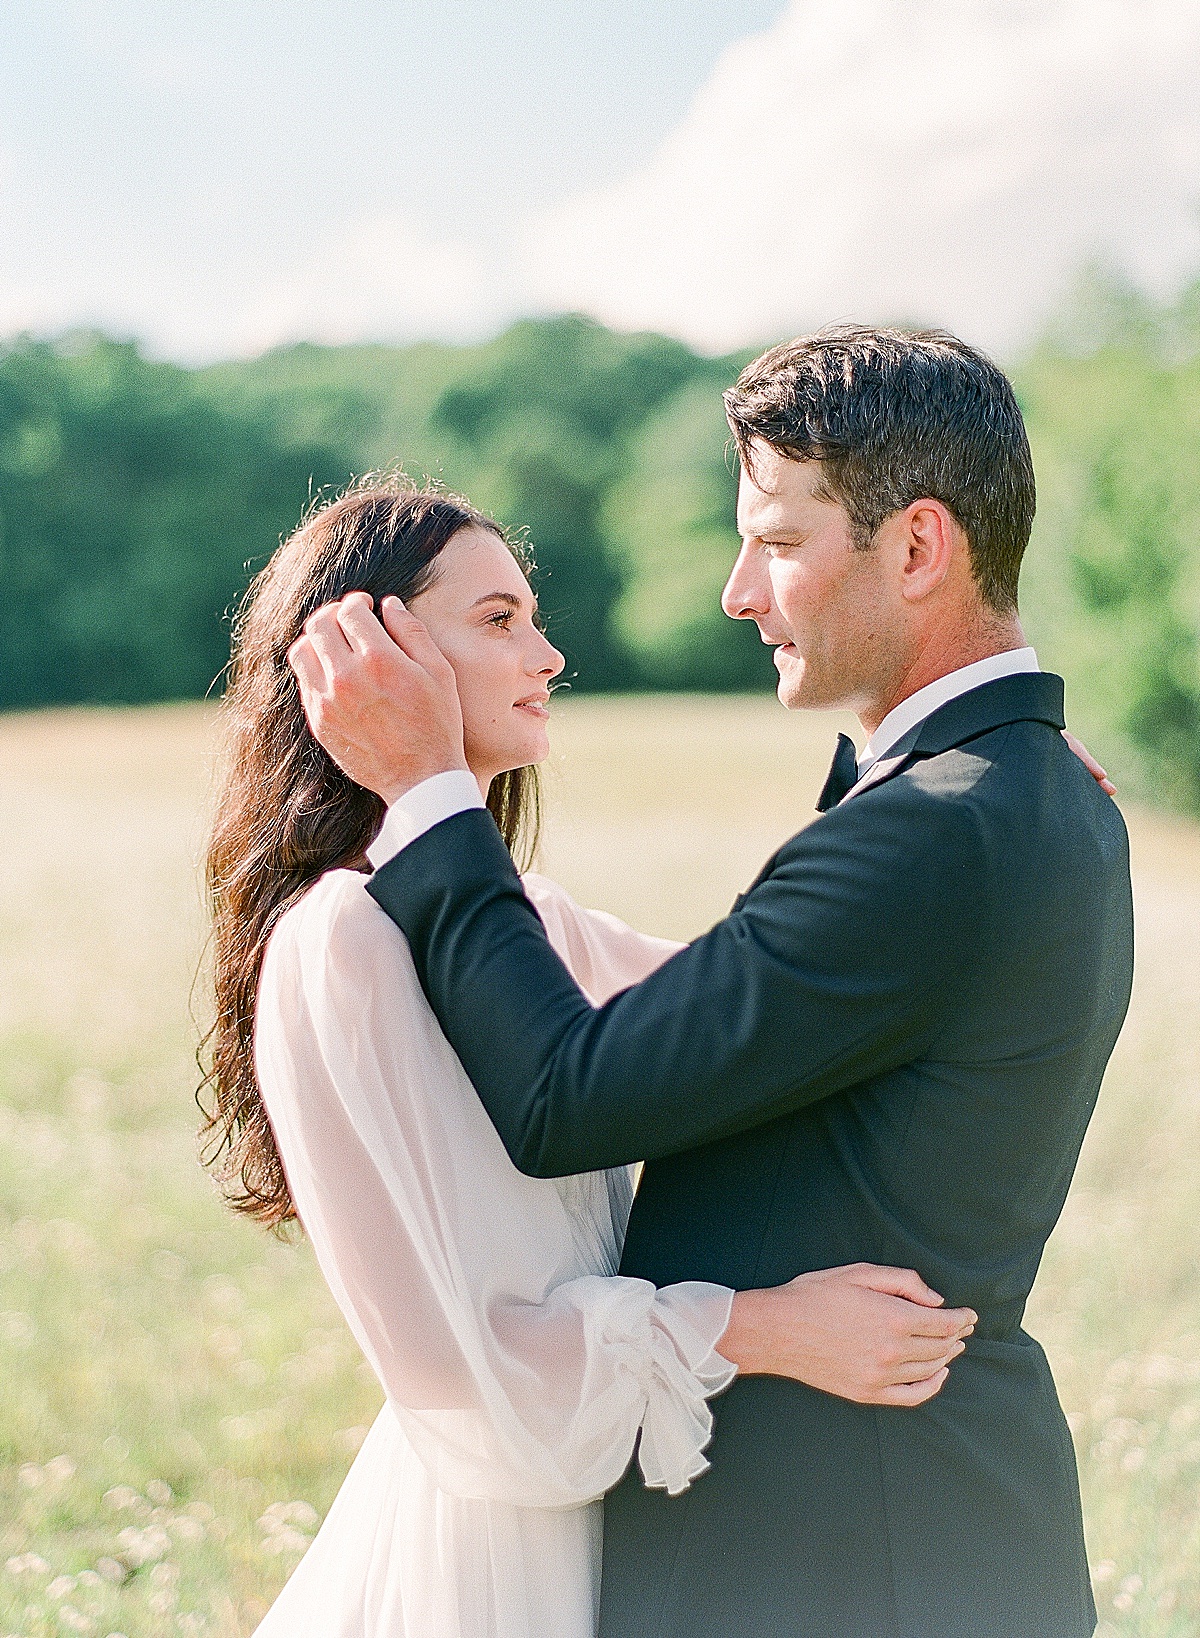 Bride and Groom looking at each other in field